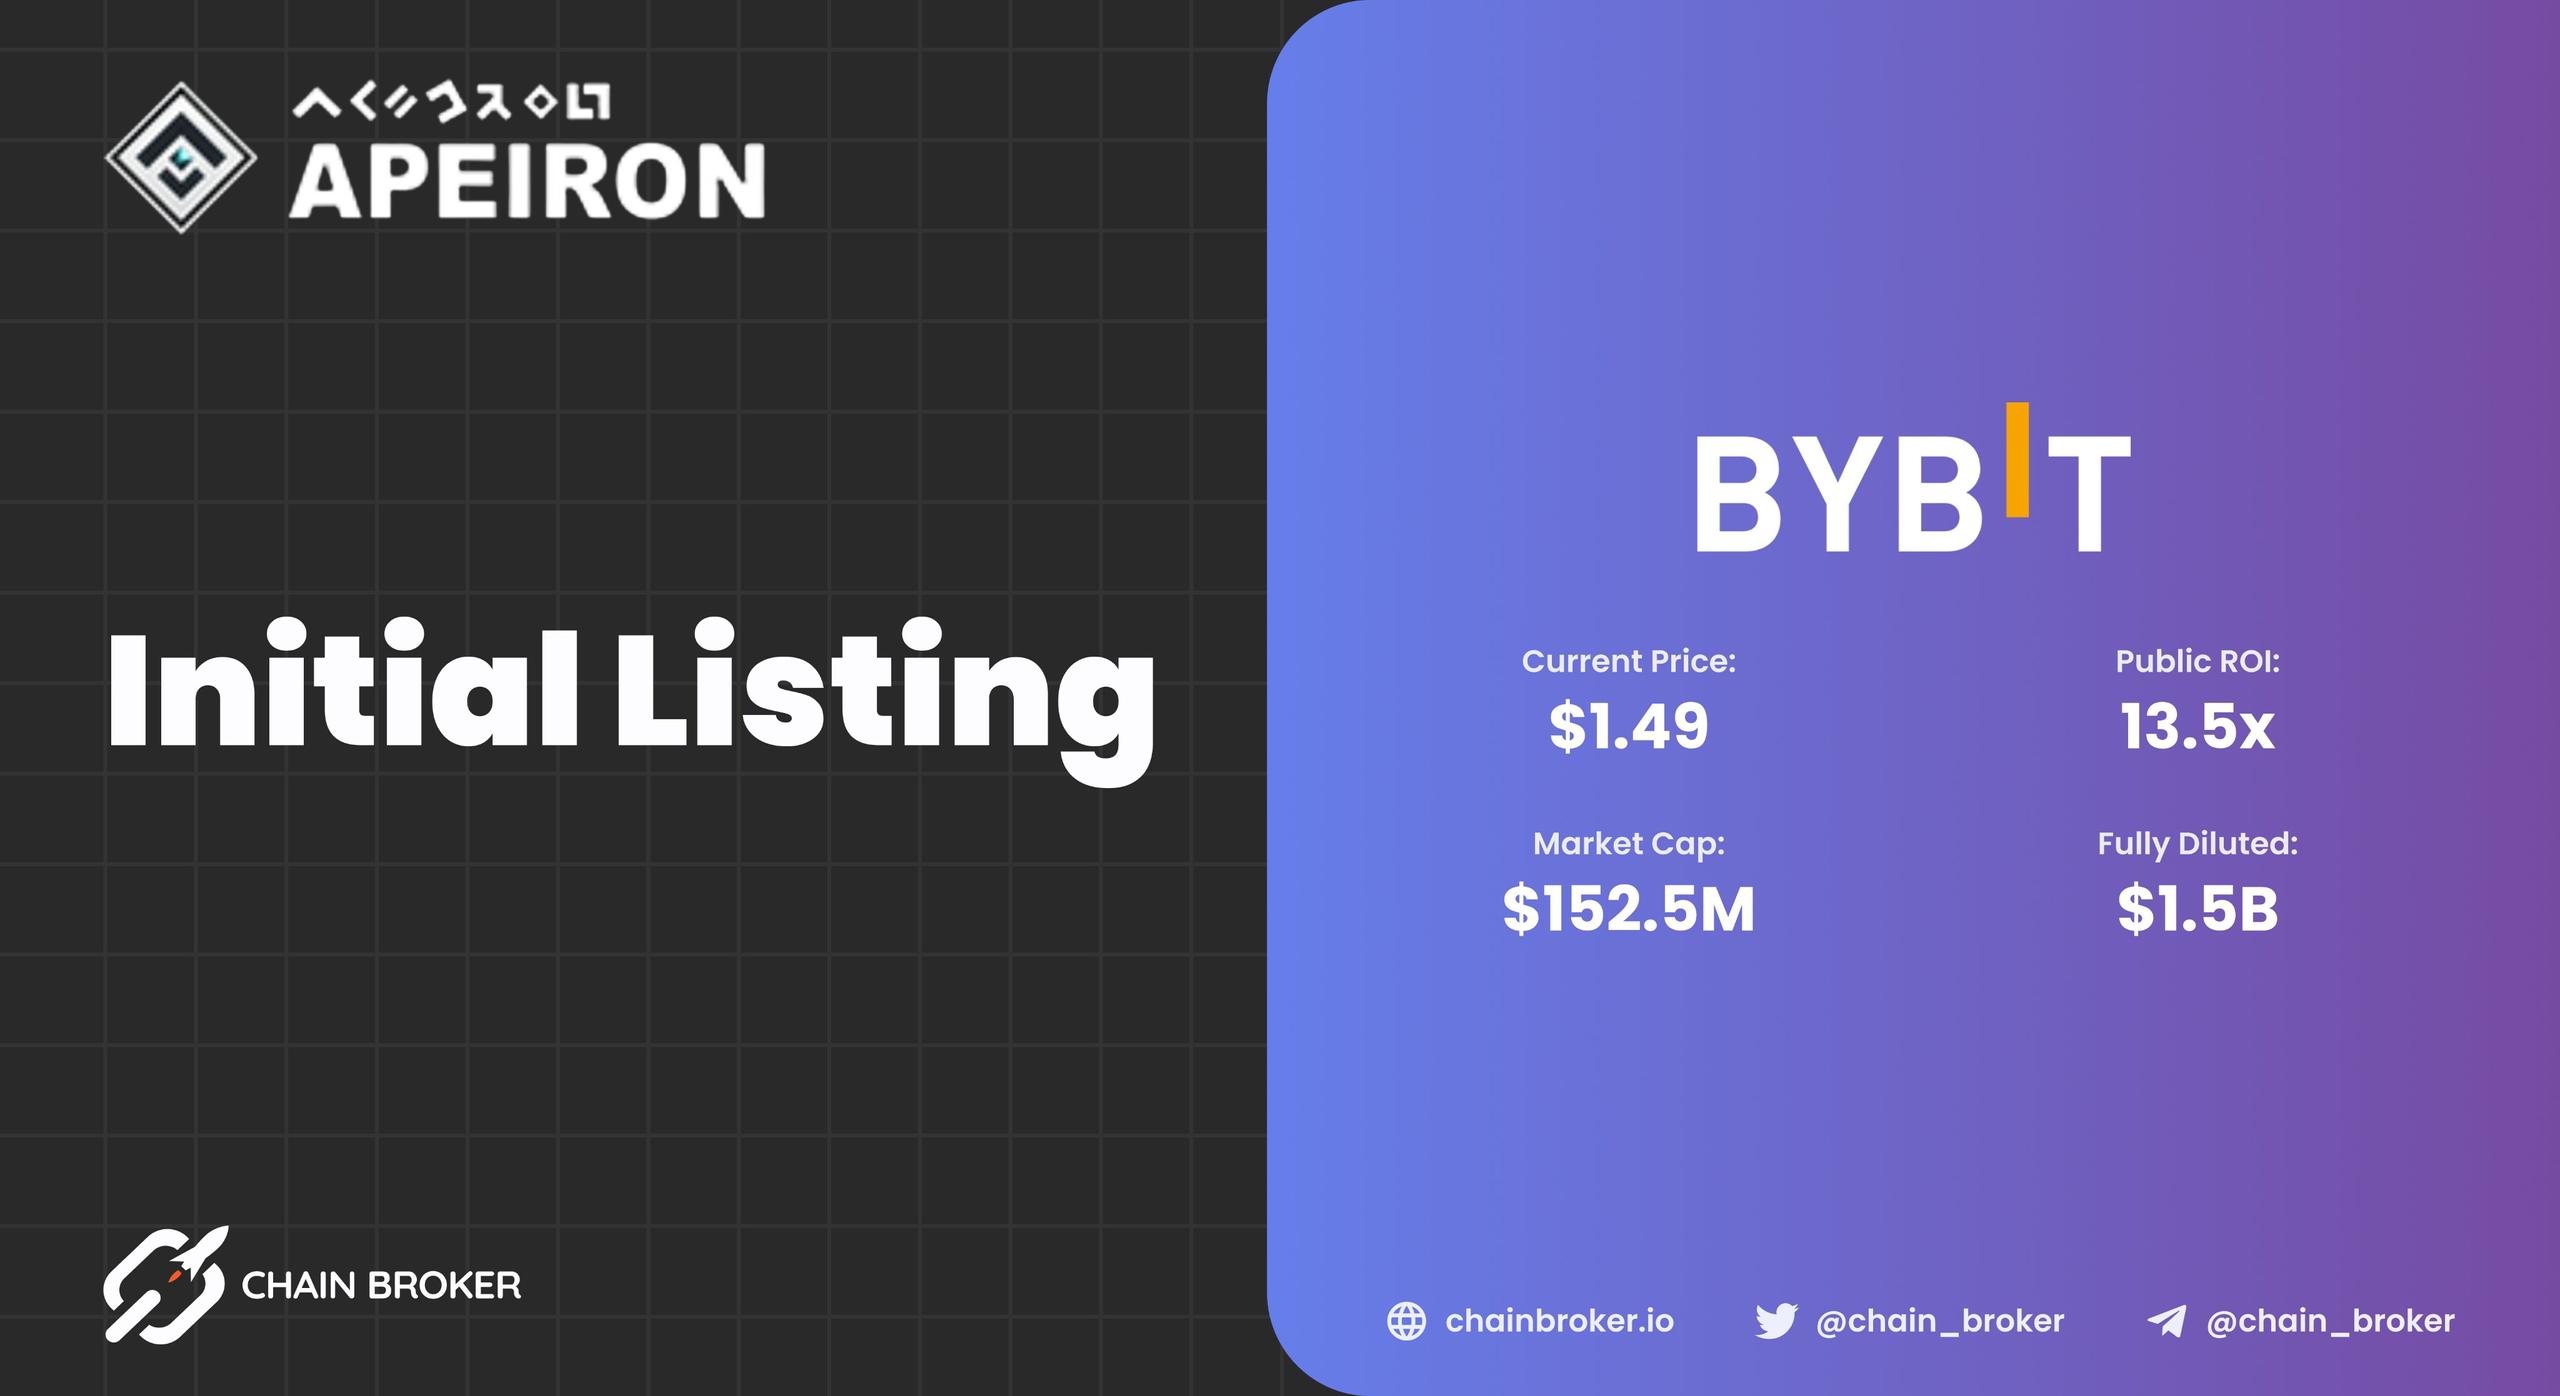 Apeiron has been Listed on Bybit